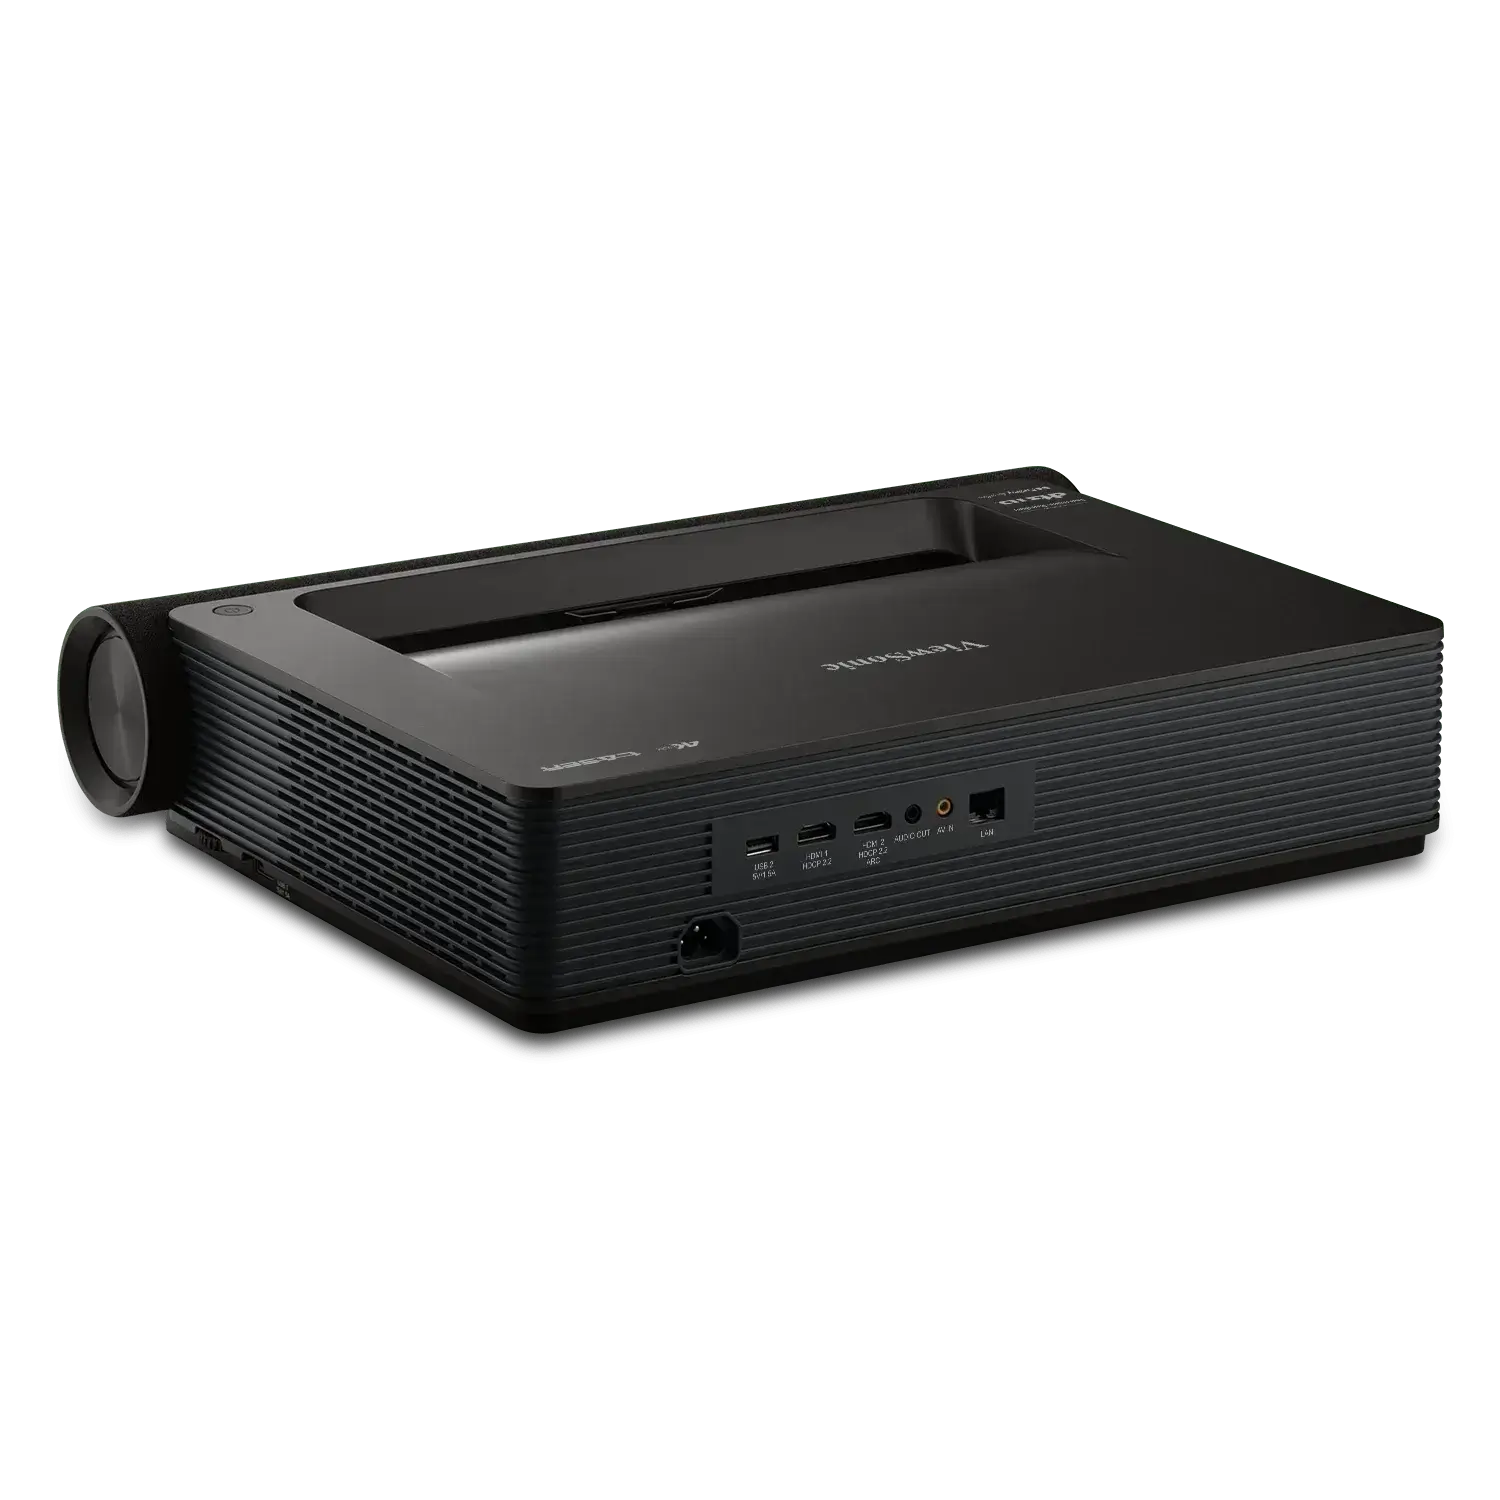 X2000B-4K - 4K UHD Ultra Short Throw Laser Projector with 2000ANSI Lumens, BT Speakers and Wi-Fi